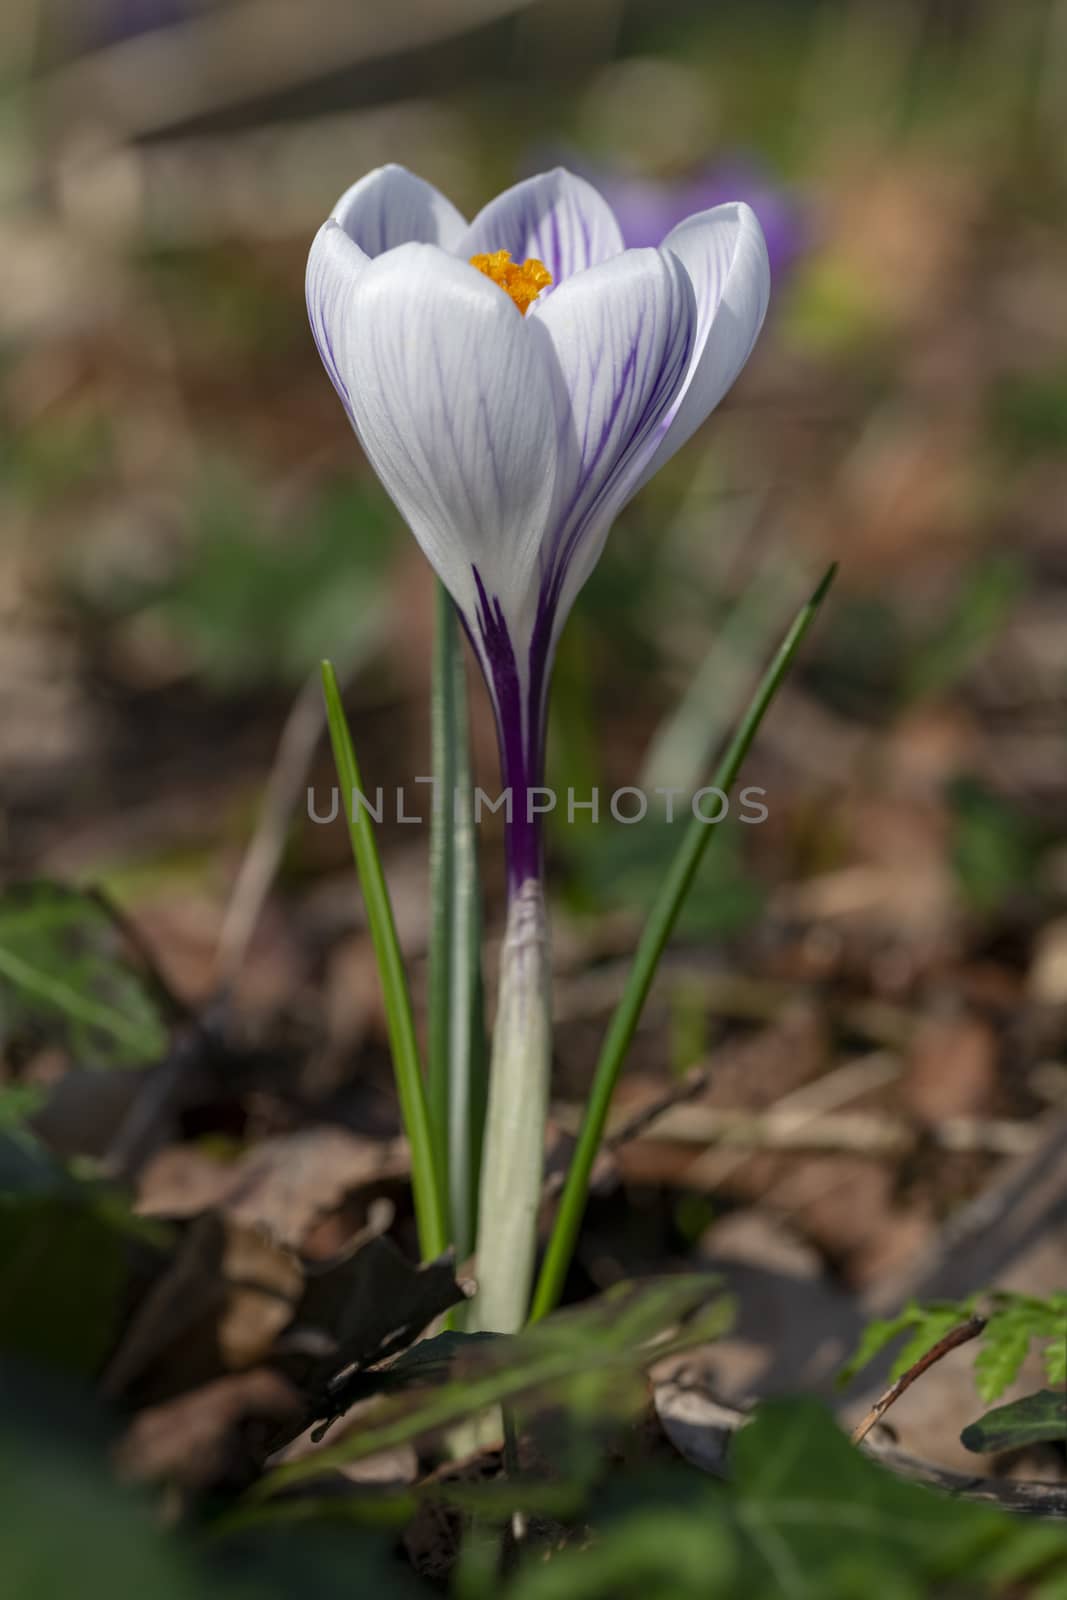 Close up of white purple crocus flower blooming at the early spring against brown dried last year fallen leafs and waiting for bees by ankorlight